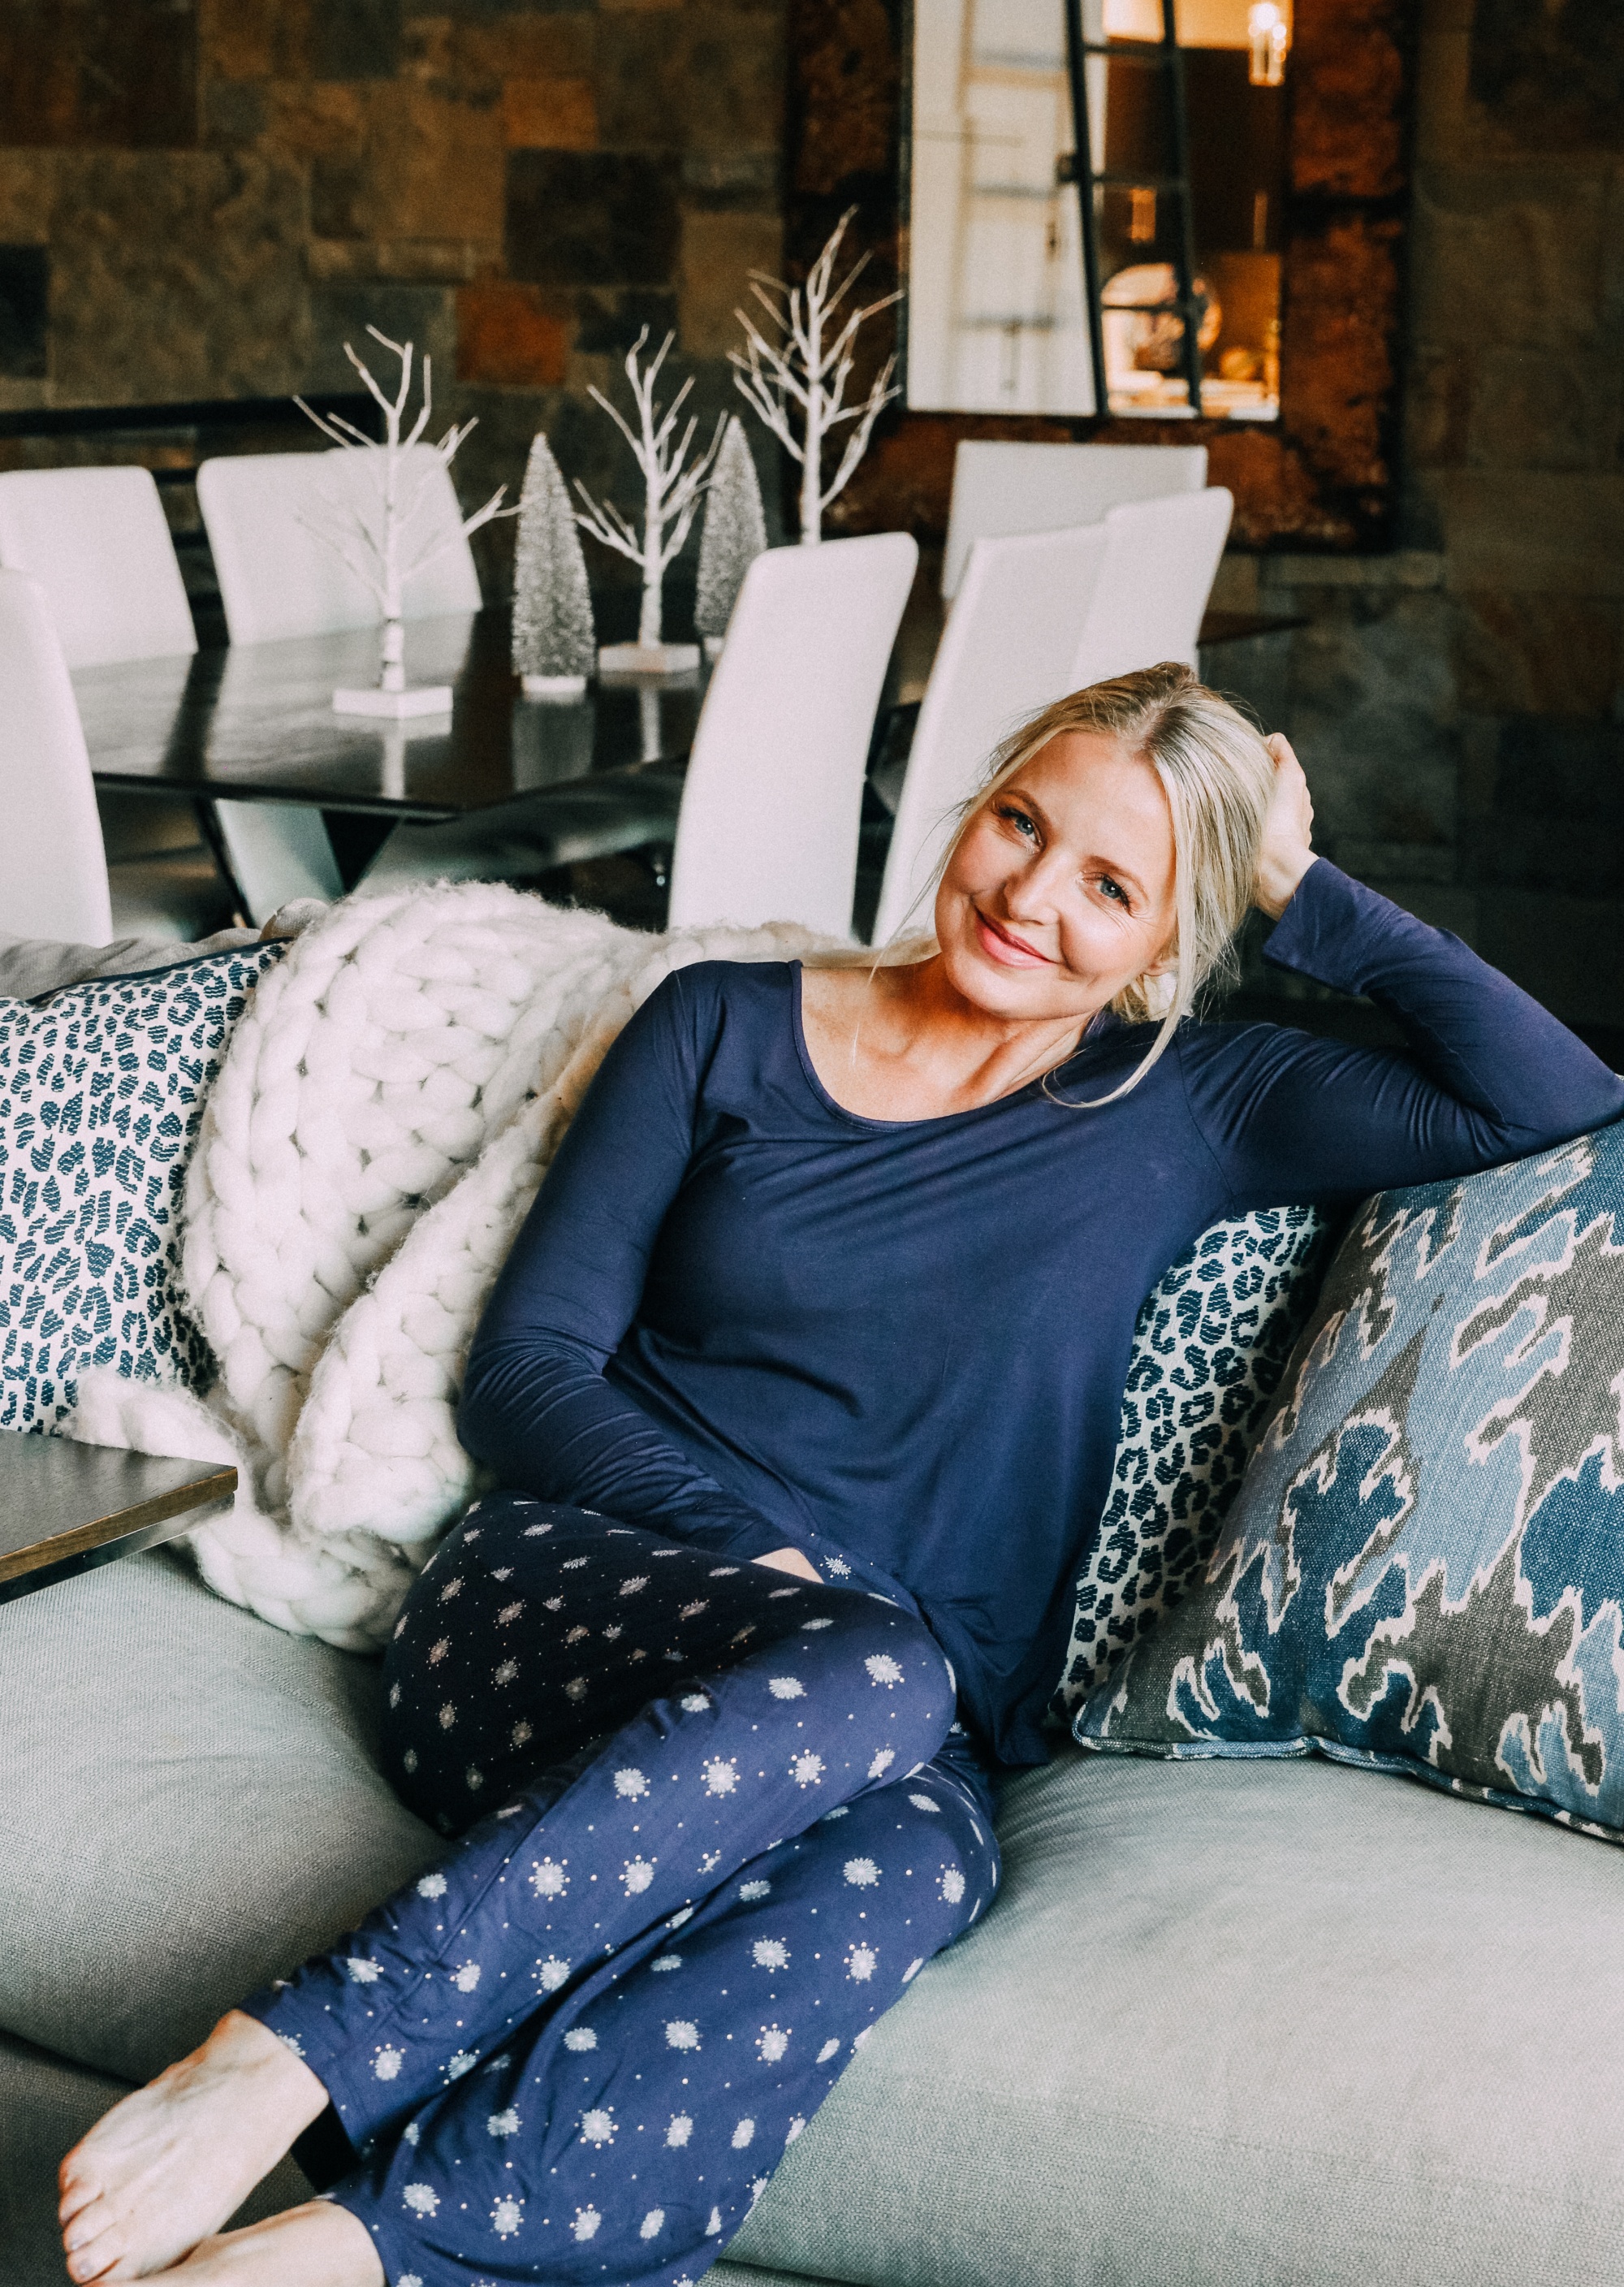 Best Pajama Sets, Fashion blogger Erin Busbee of BusbeeStyle.com featuring navy snowflake pajamas from Soma Intimates that are on major sale in Telluride, CO, how to help coronavirus relief